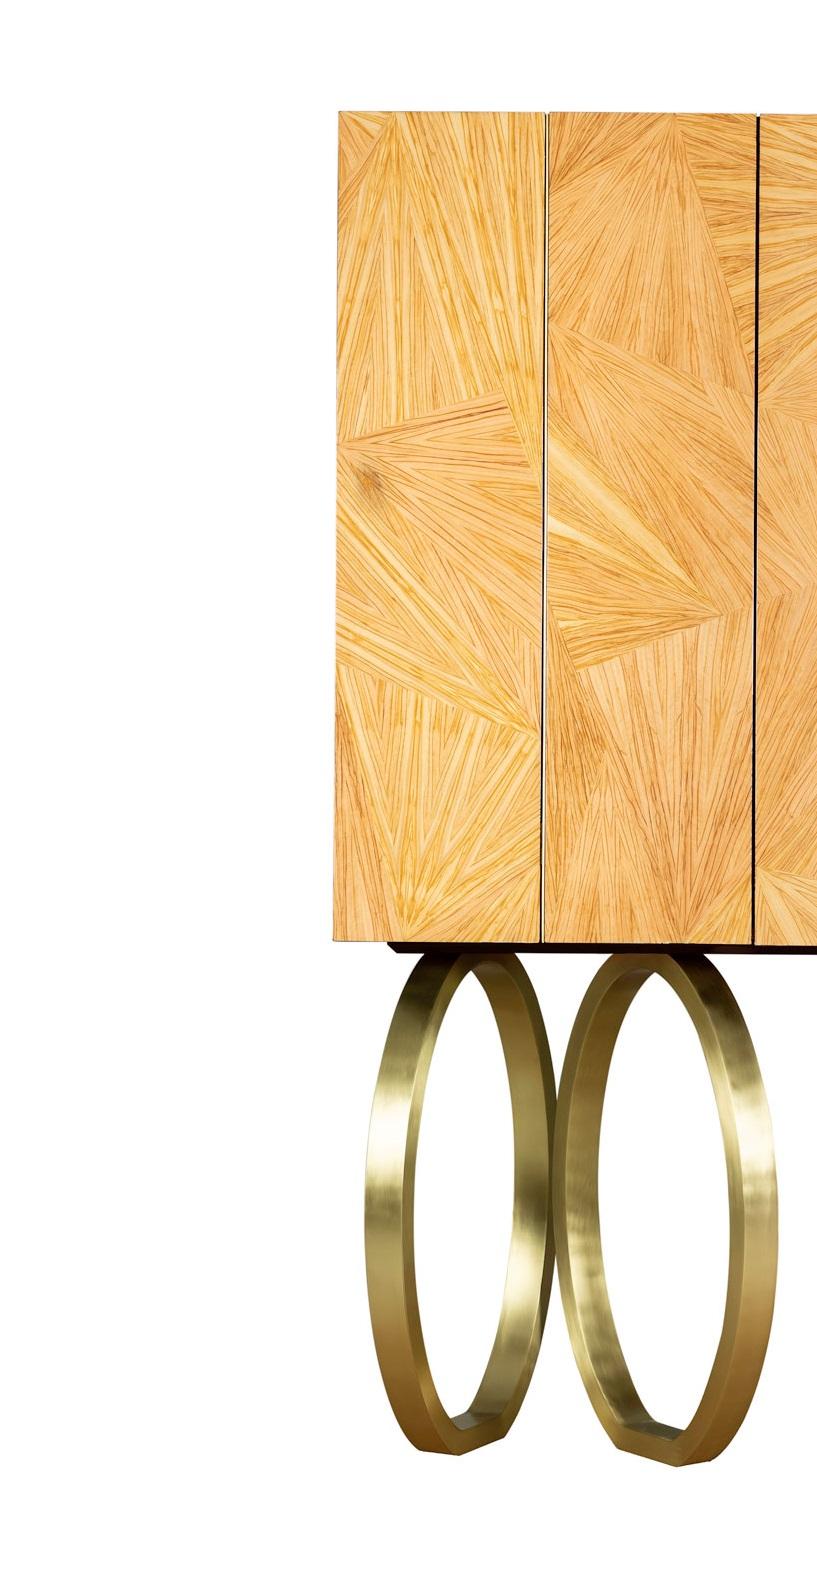 Mirage Bar Cabinet by Memoir Essence
Dimensions: D 50 x W 90 x H 165 cm.
Materials: Brushed brass, olive veneer patchwork and lacquer.

Also available in polished brass and olive veneer without patchwork. Please contact us.

Inspired by the optical